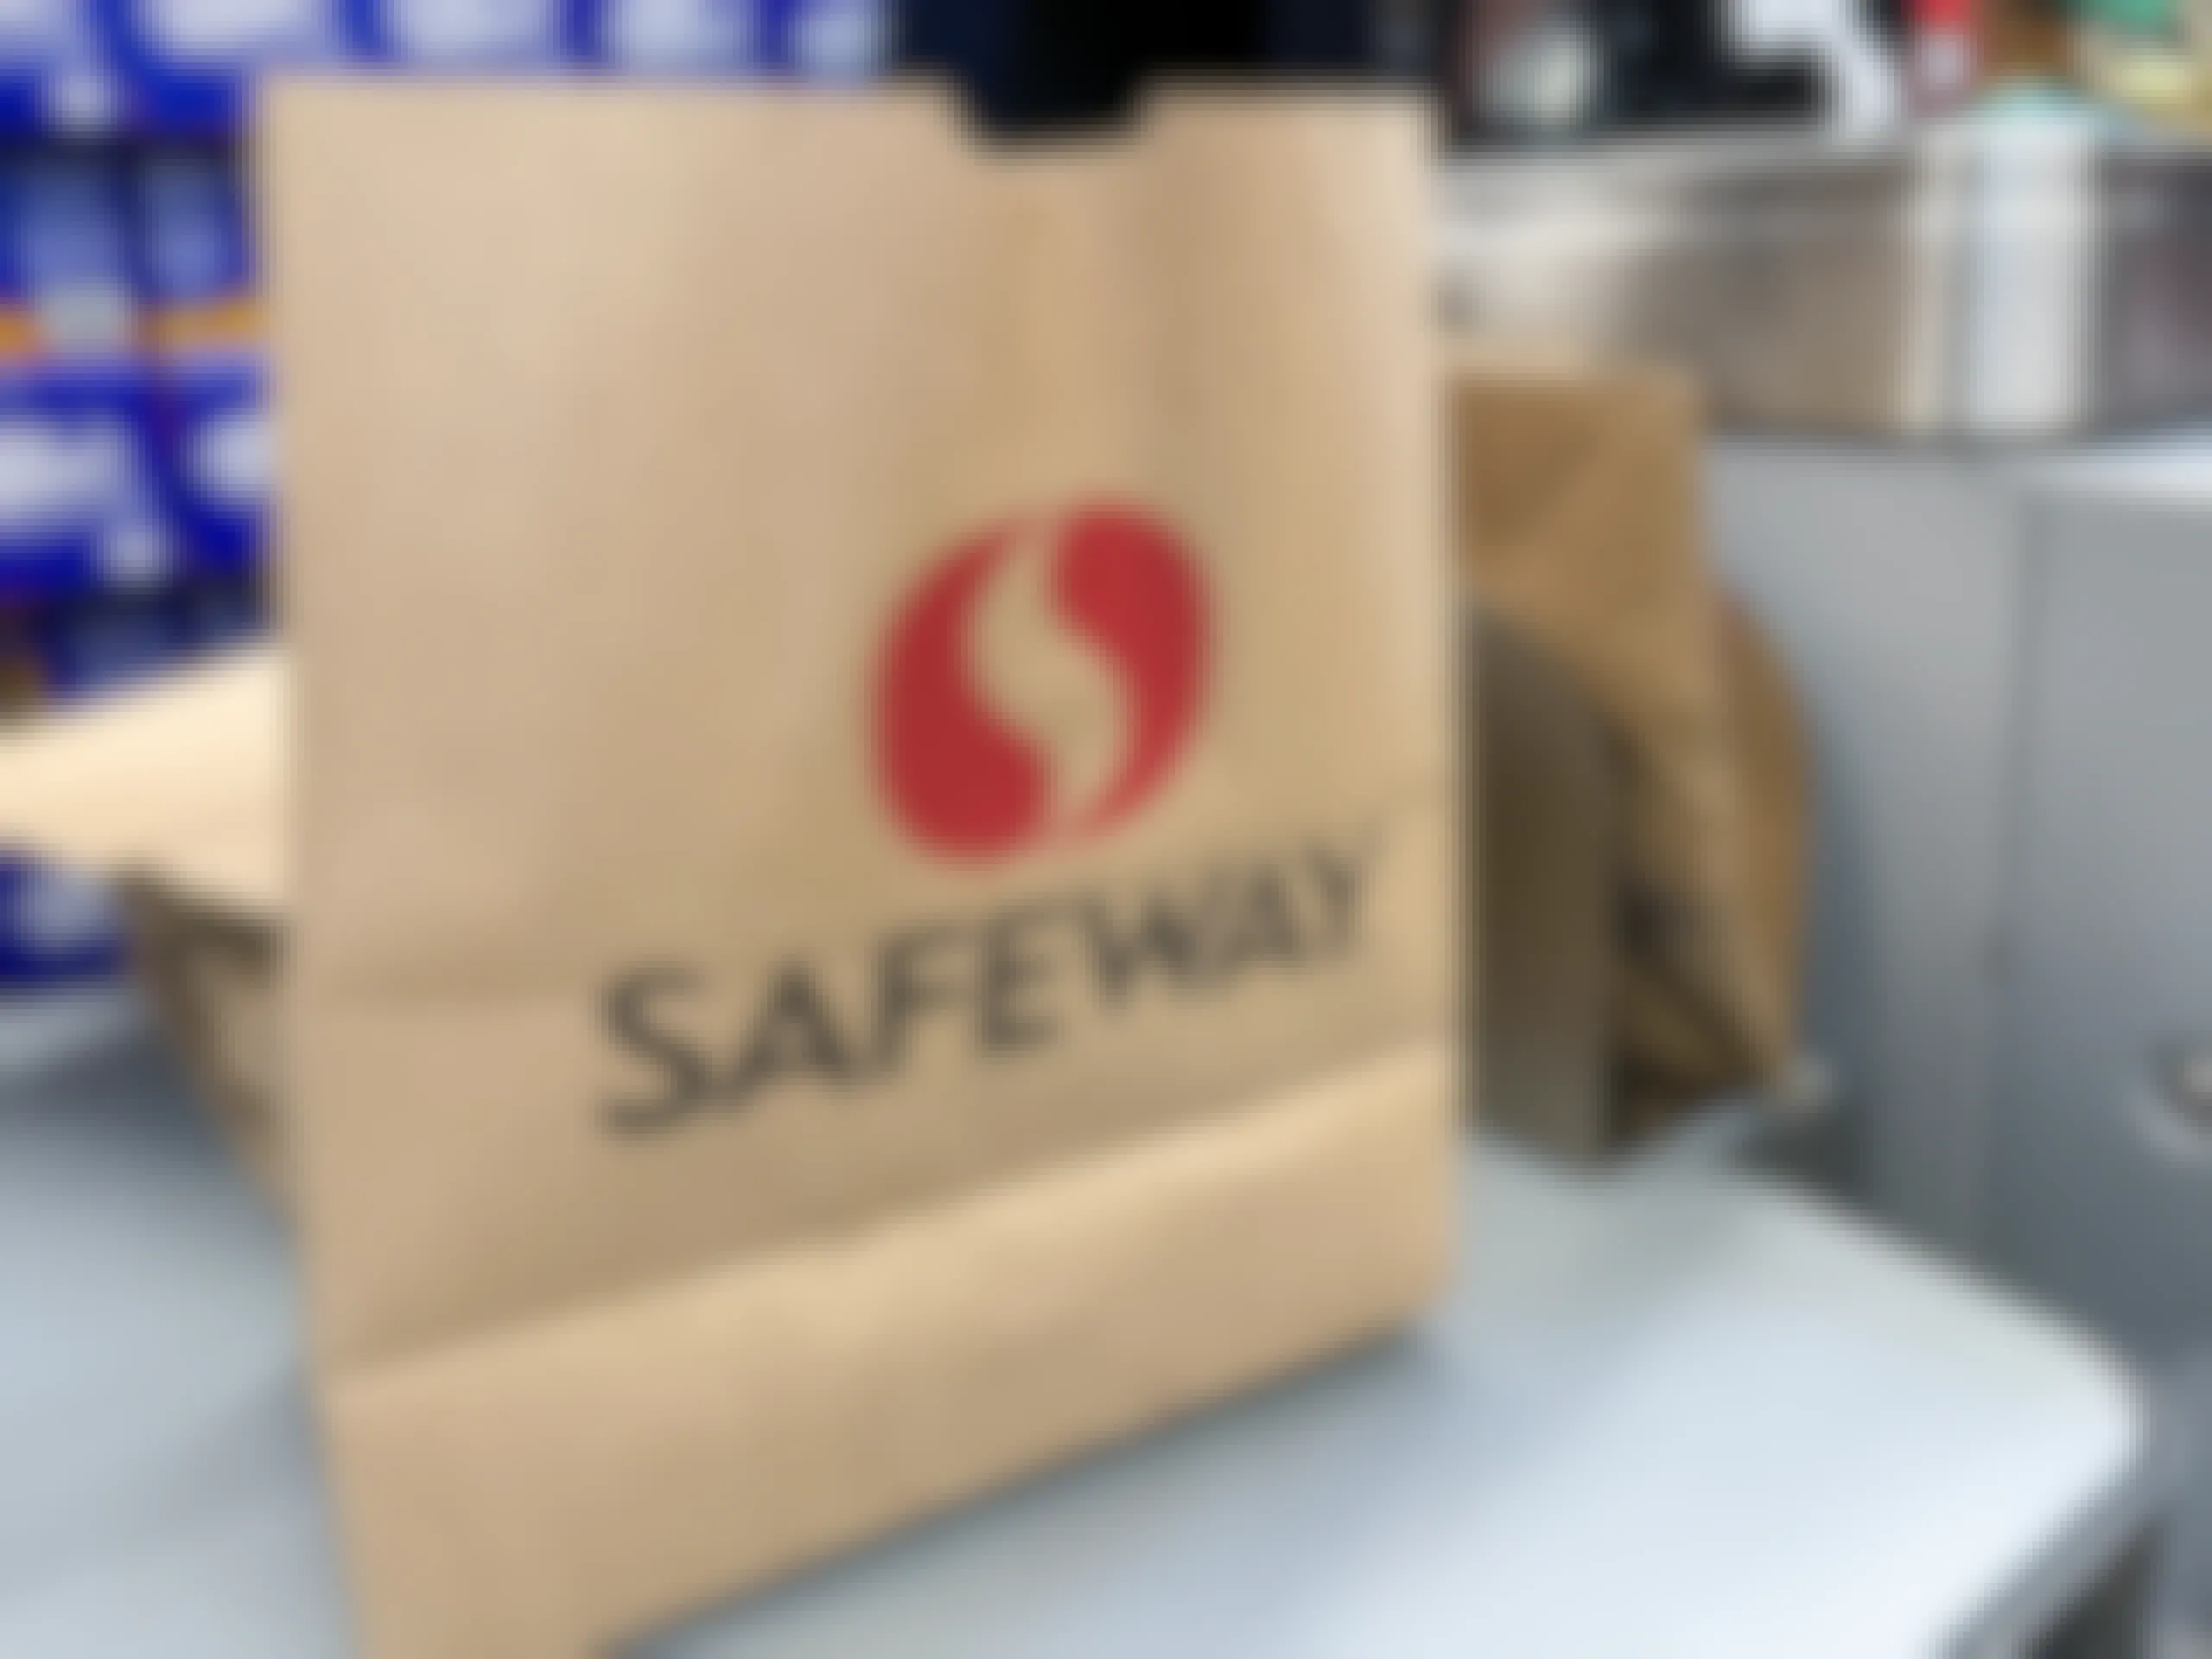 A paper Safeway bag next to the checkout scanner at Safeway.